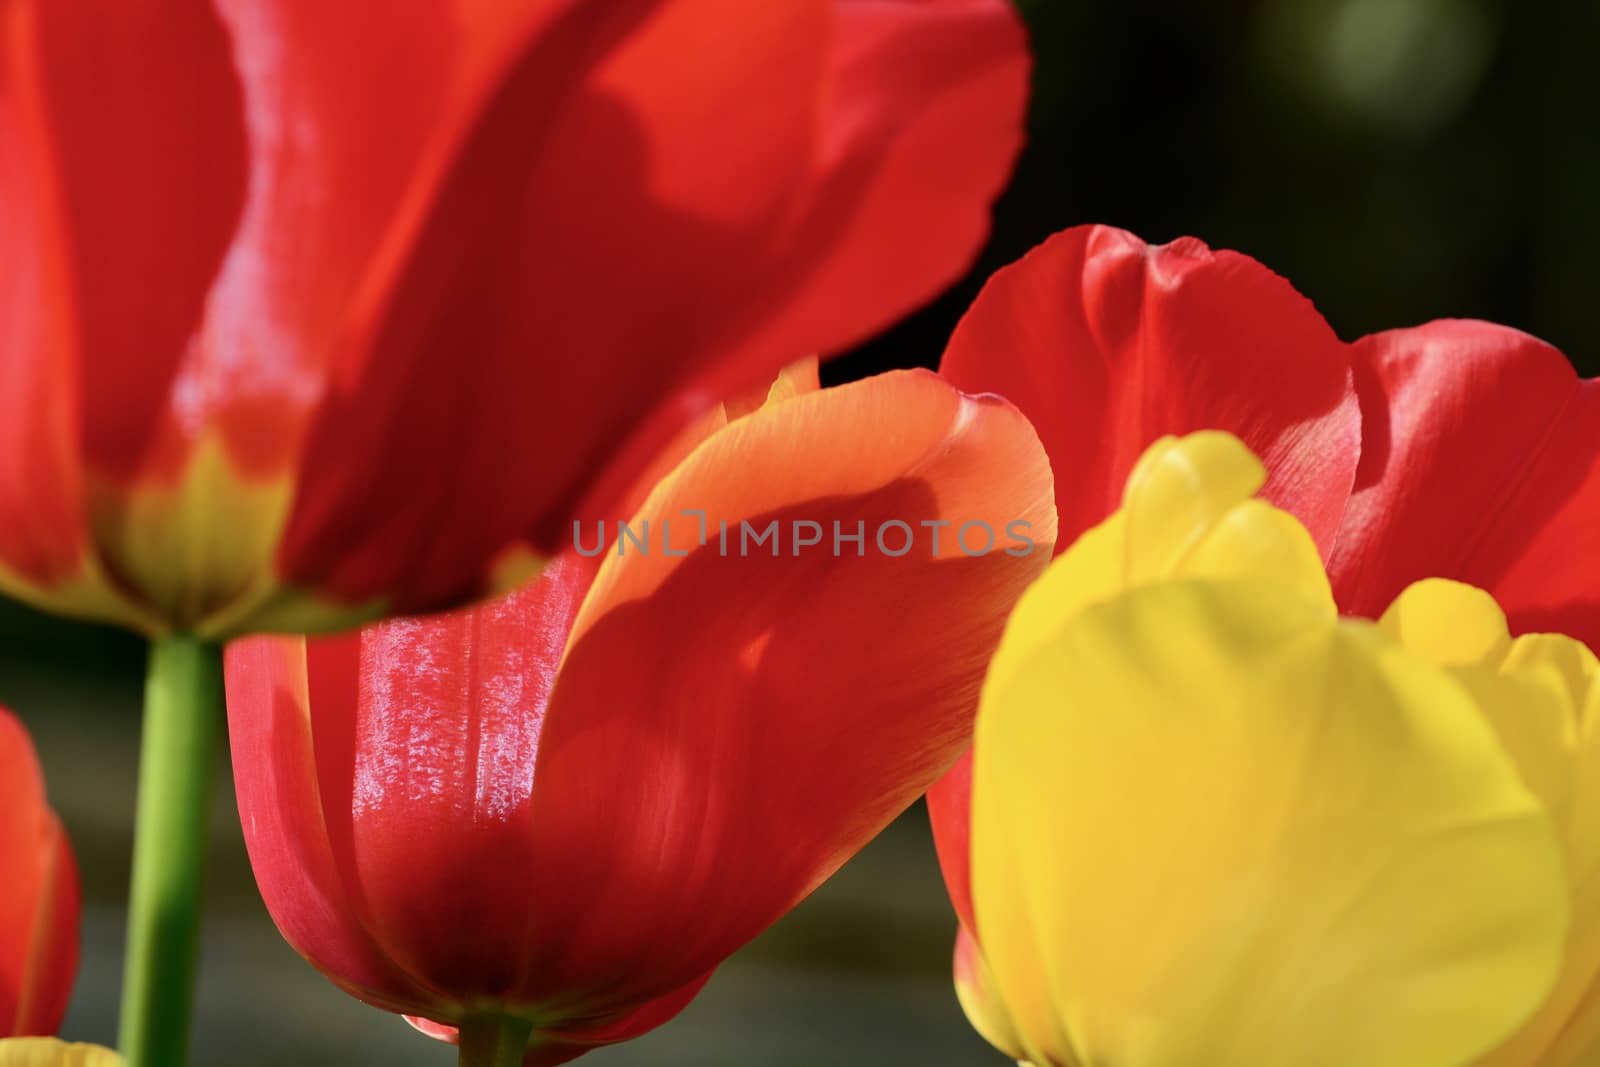 Close-up of a flower, beautiful flowers, being close to nature, bringing nature close to you, red and yellow tulip flowers